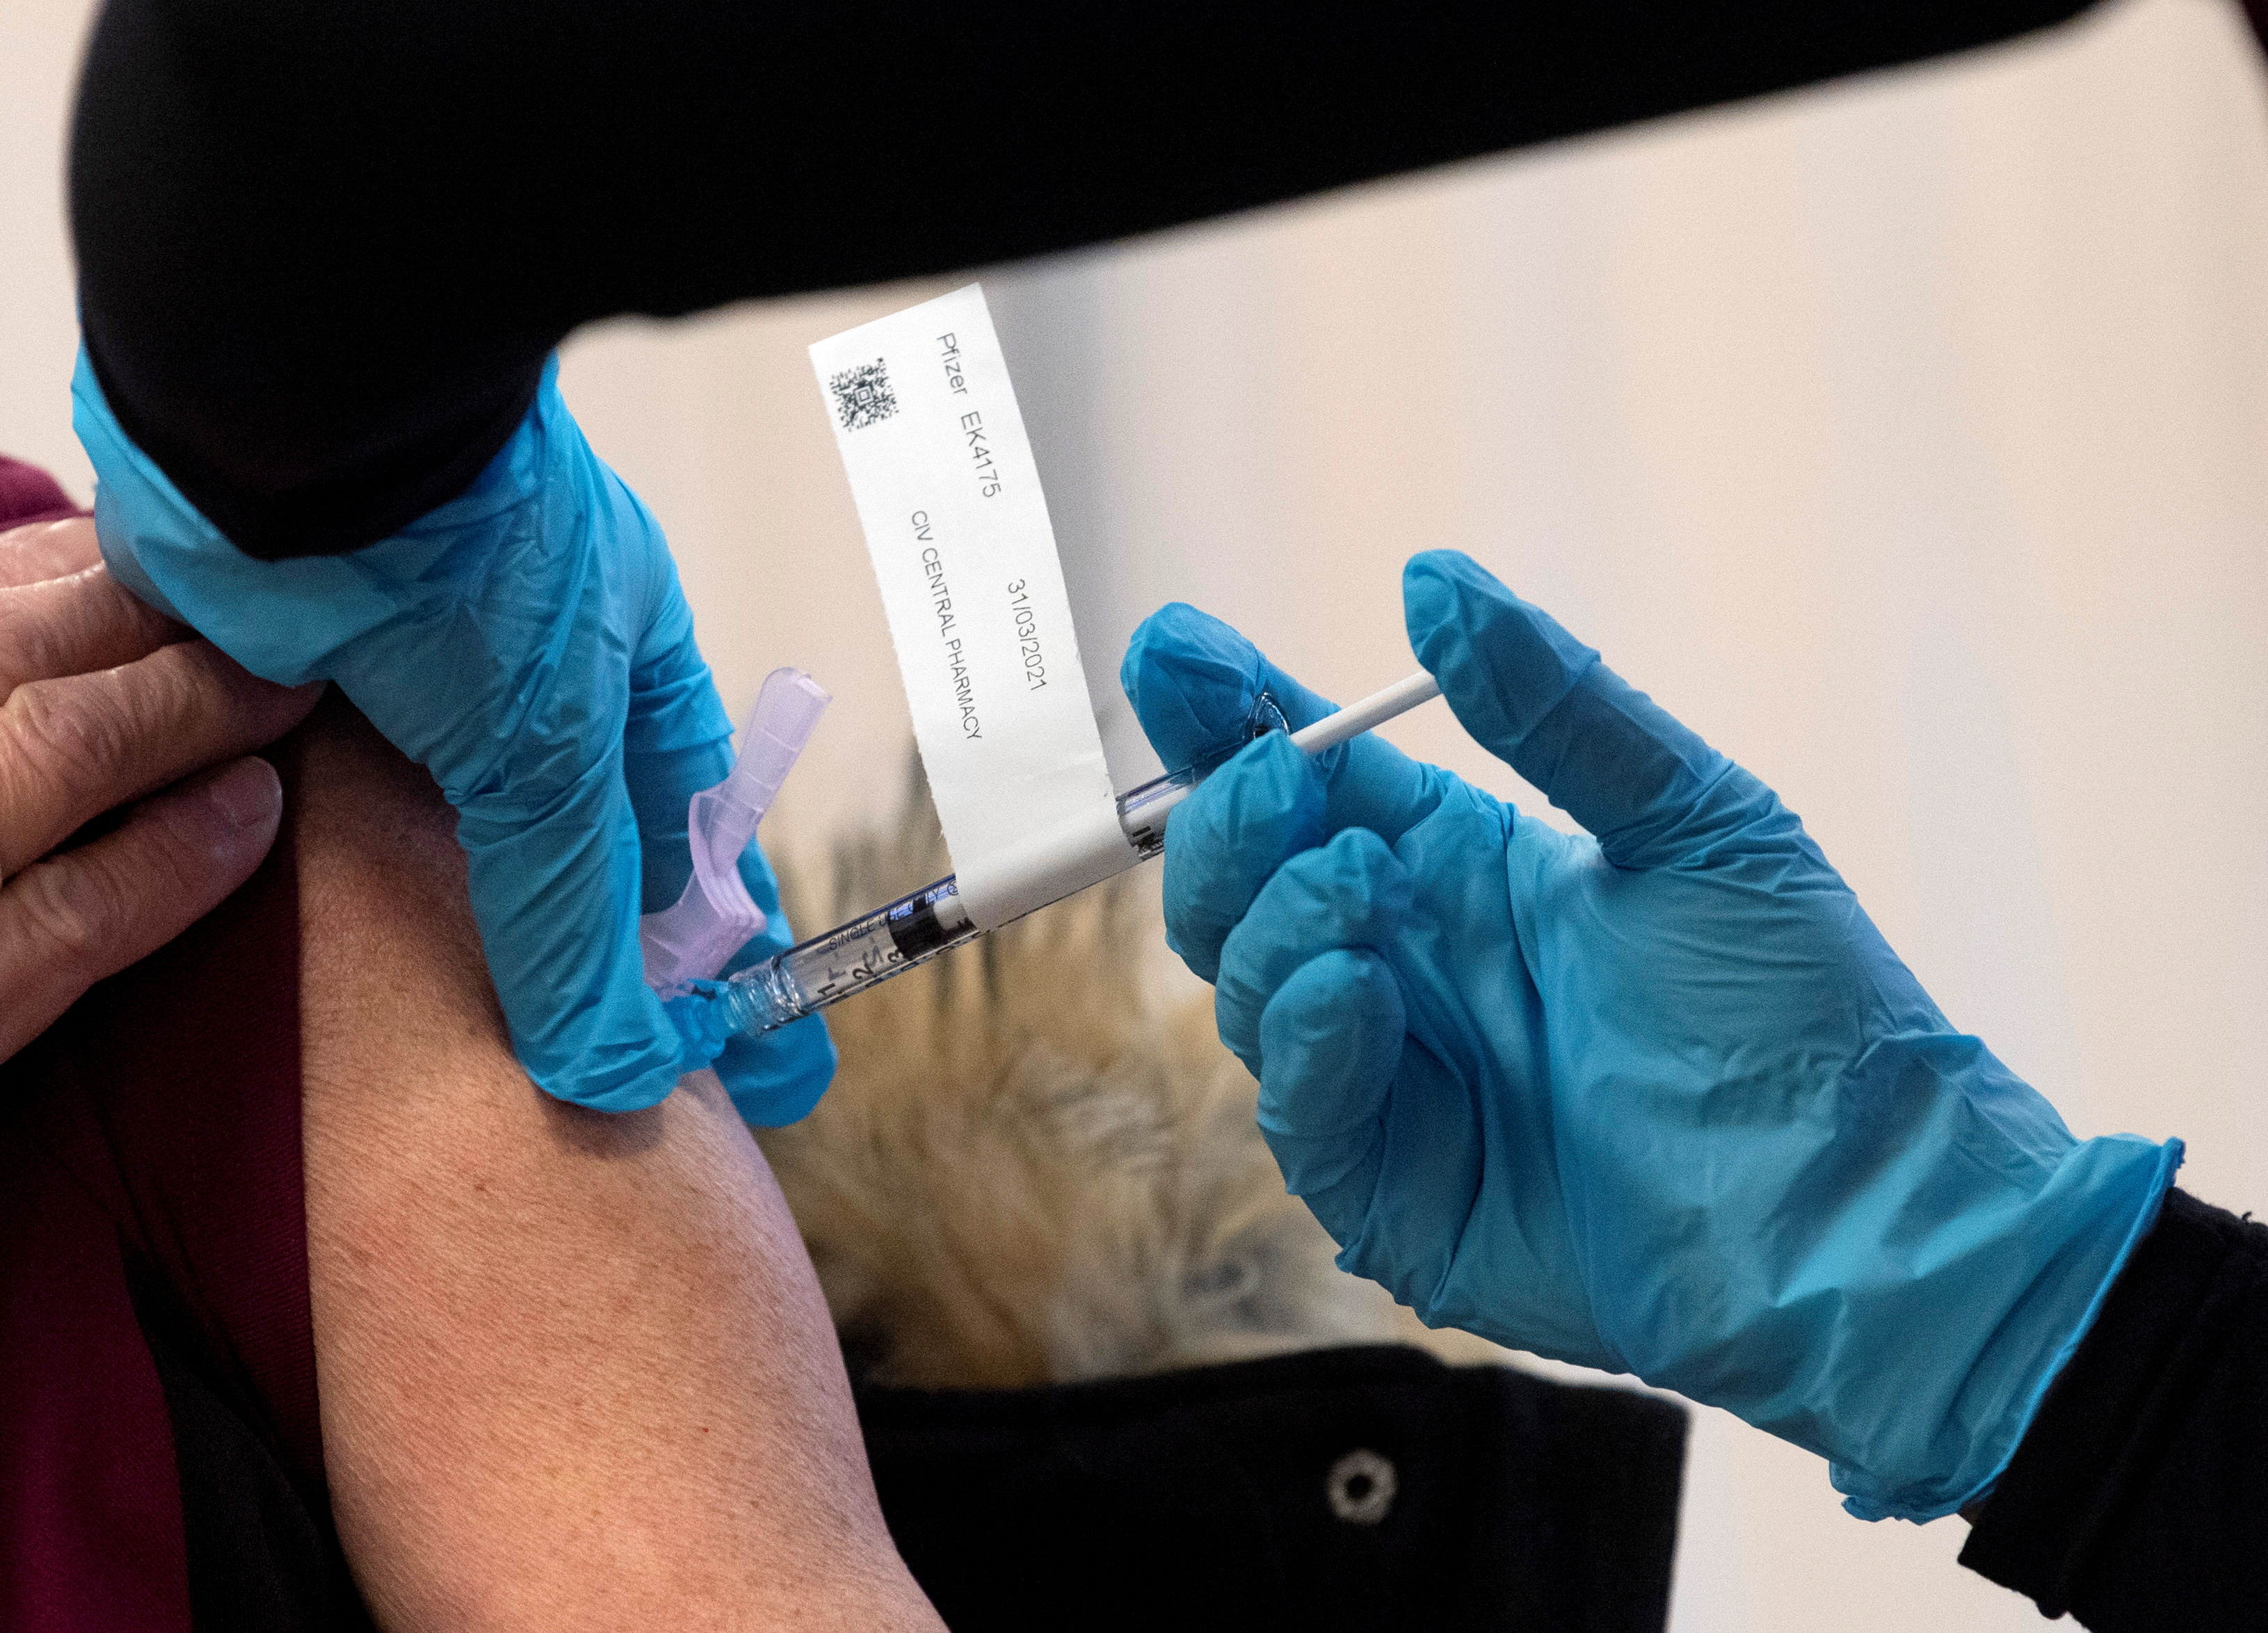 The Pfizer-BioNTech COVID-19 vaccine is administered to a personal support worker at the Civic Hospital in Ottawa, Ontario, Canada December 15, 2020. Adrian Wyld/Pool via REUTERS